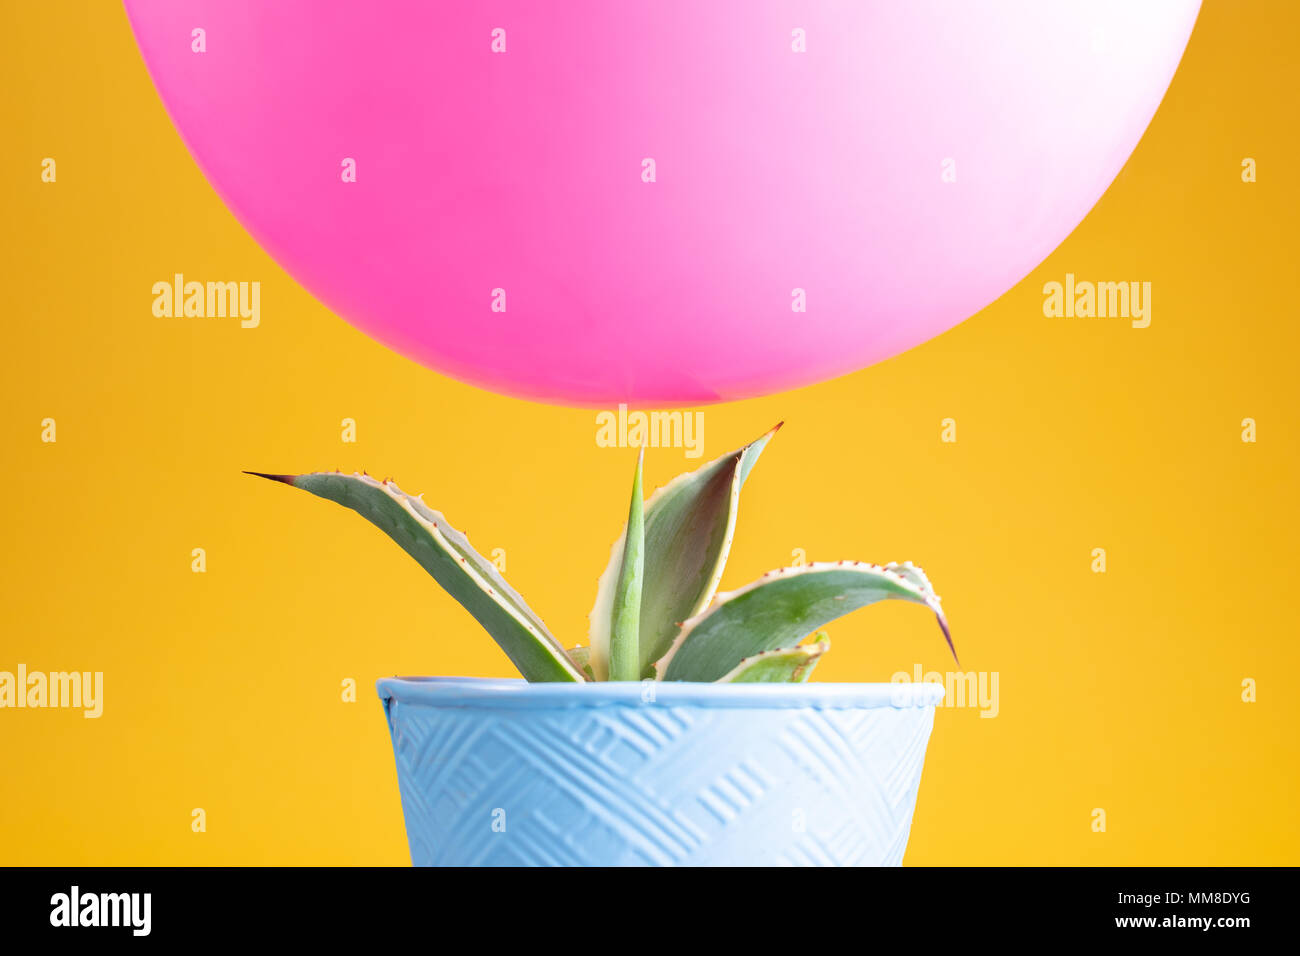 Pink balloon balancing precariously above a sharp point cactus with a bright yellow background Stock Photo